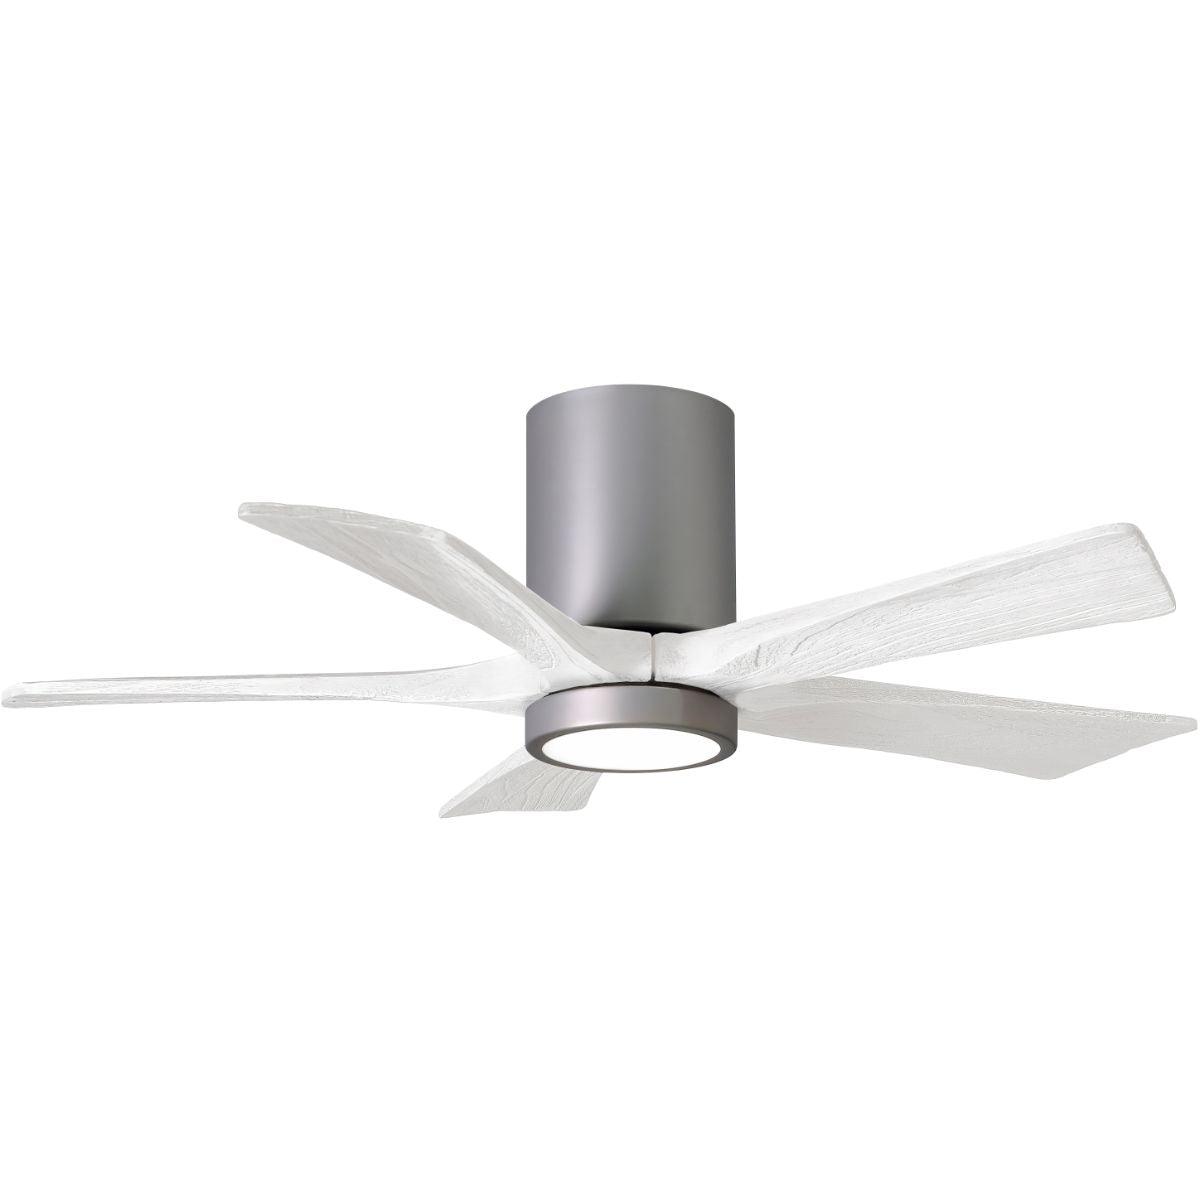 Irene 42 Inch Modern Outdoor Ceiling Fan With Light, Wall And Remote Control Included